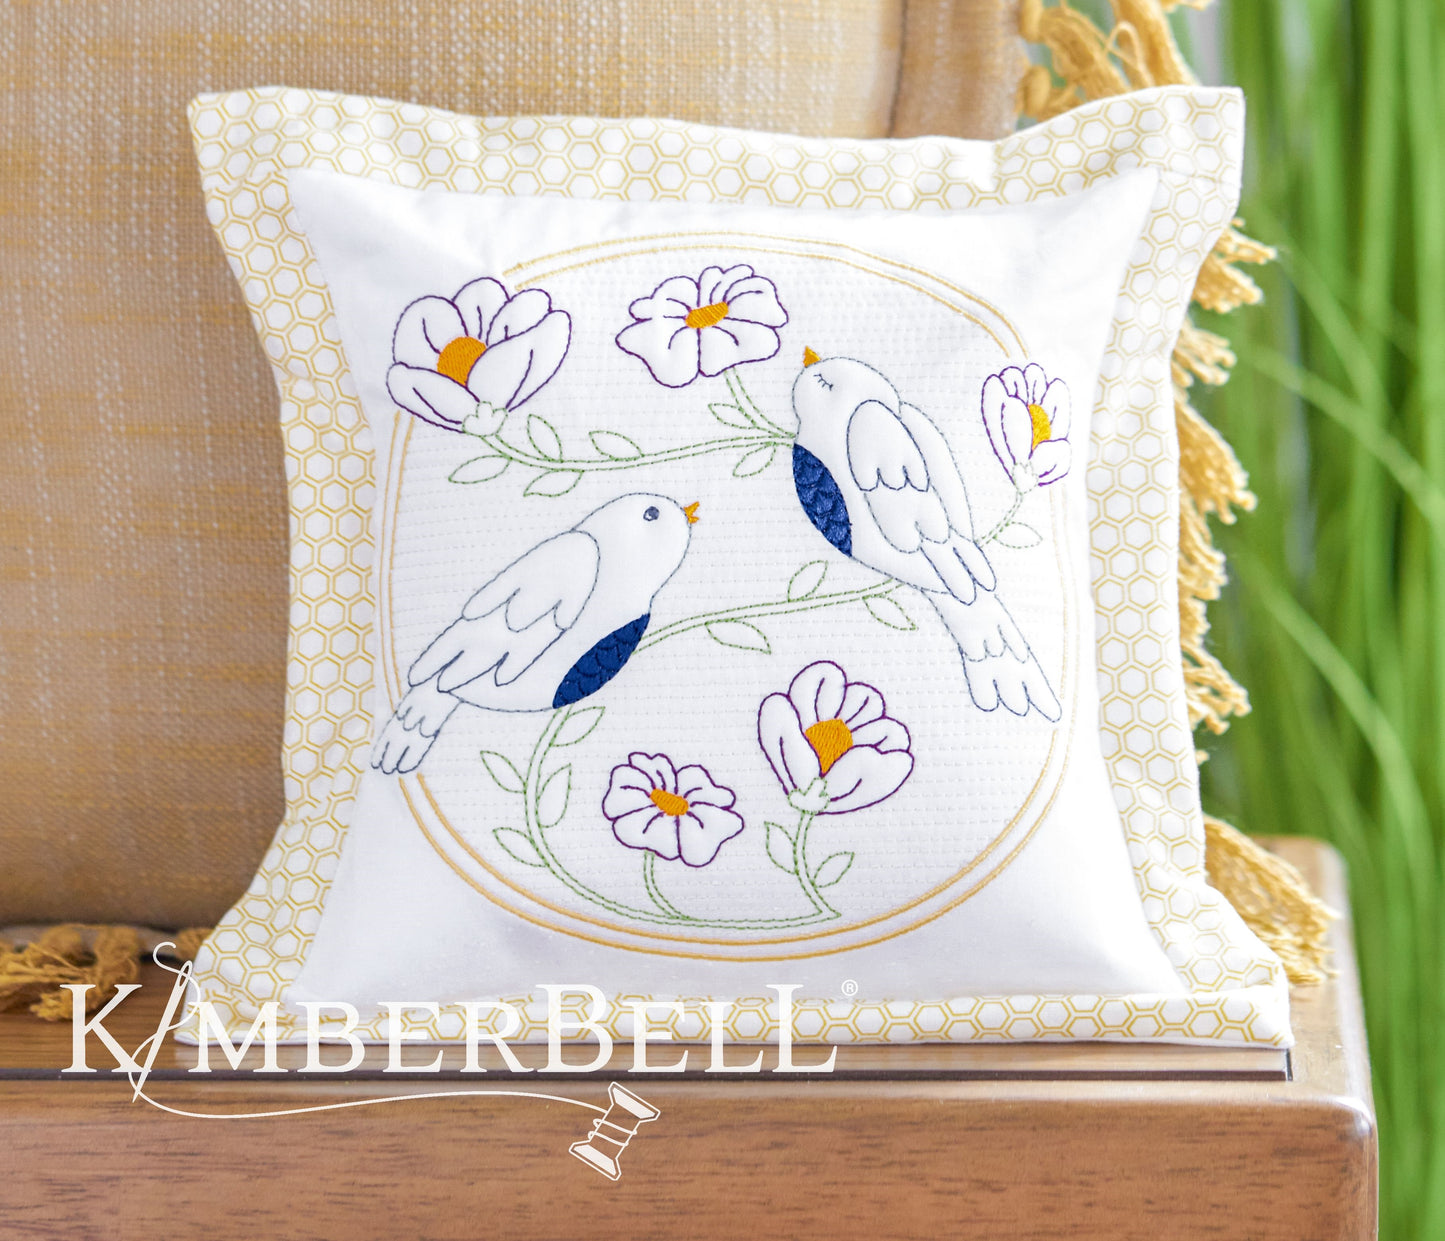 Kimberbell Exclusives Embroidery Class